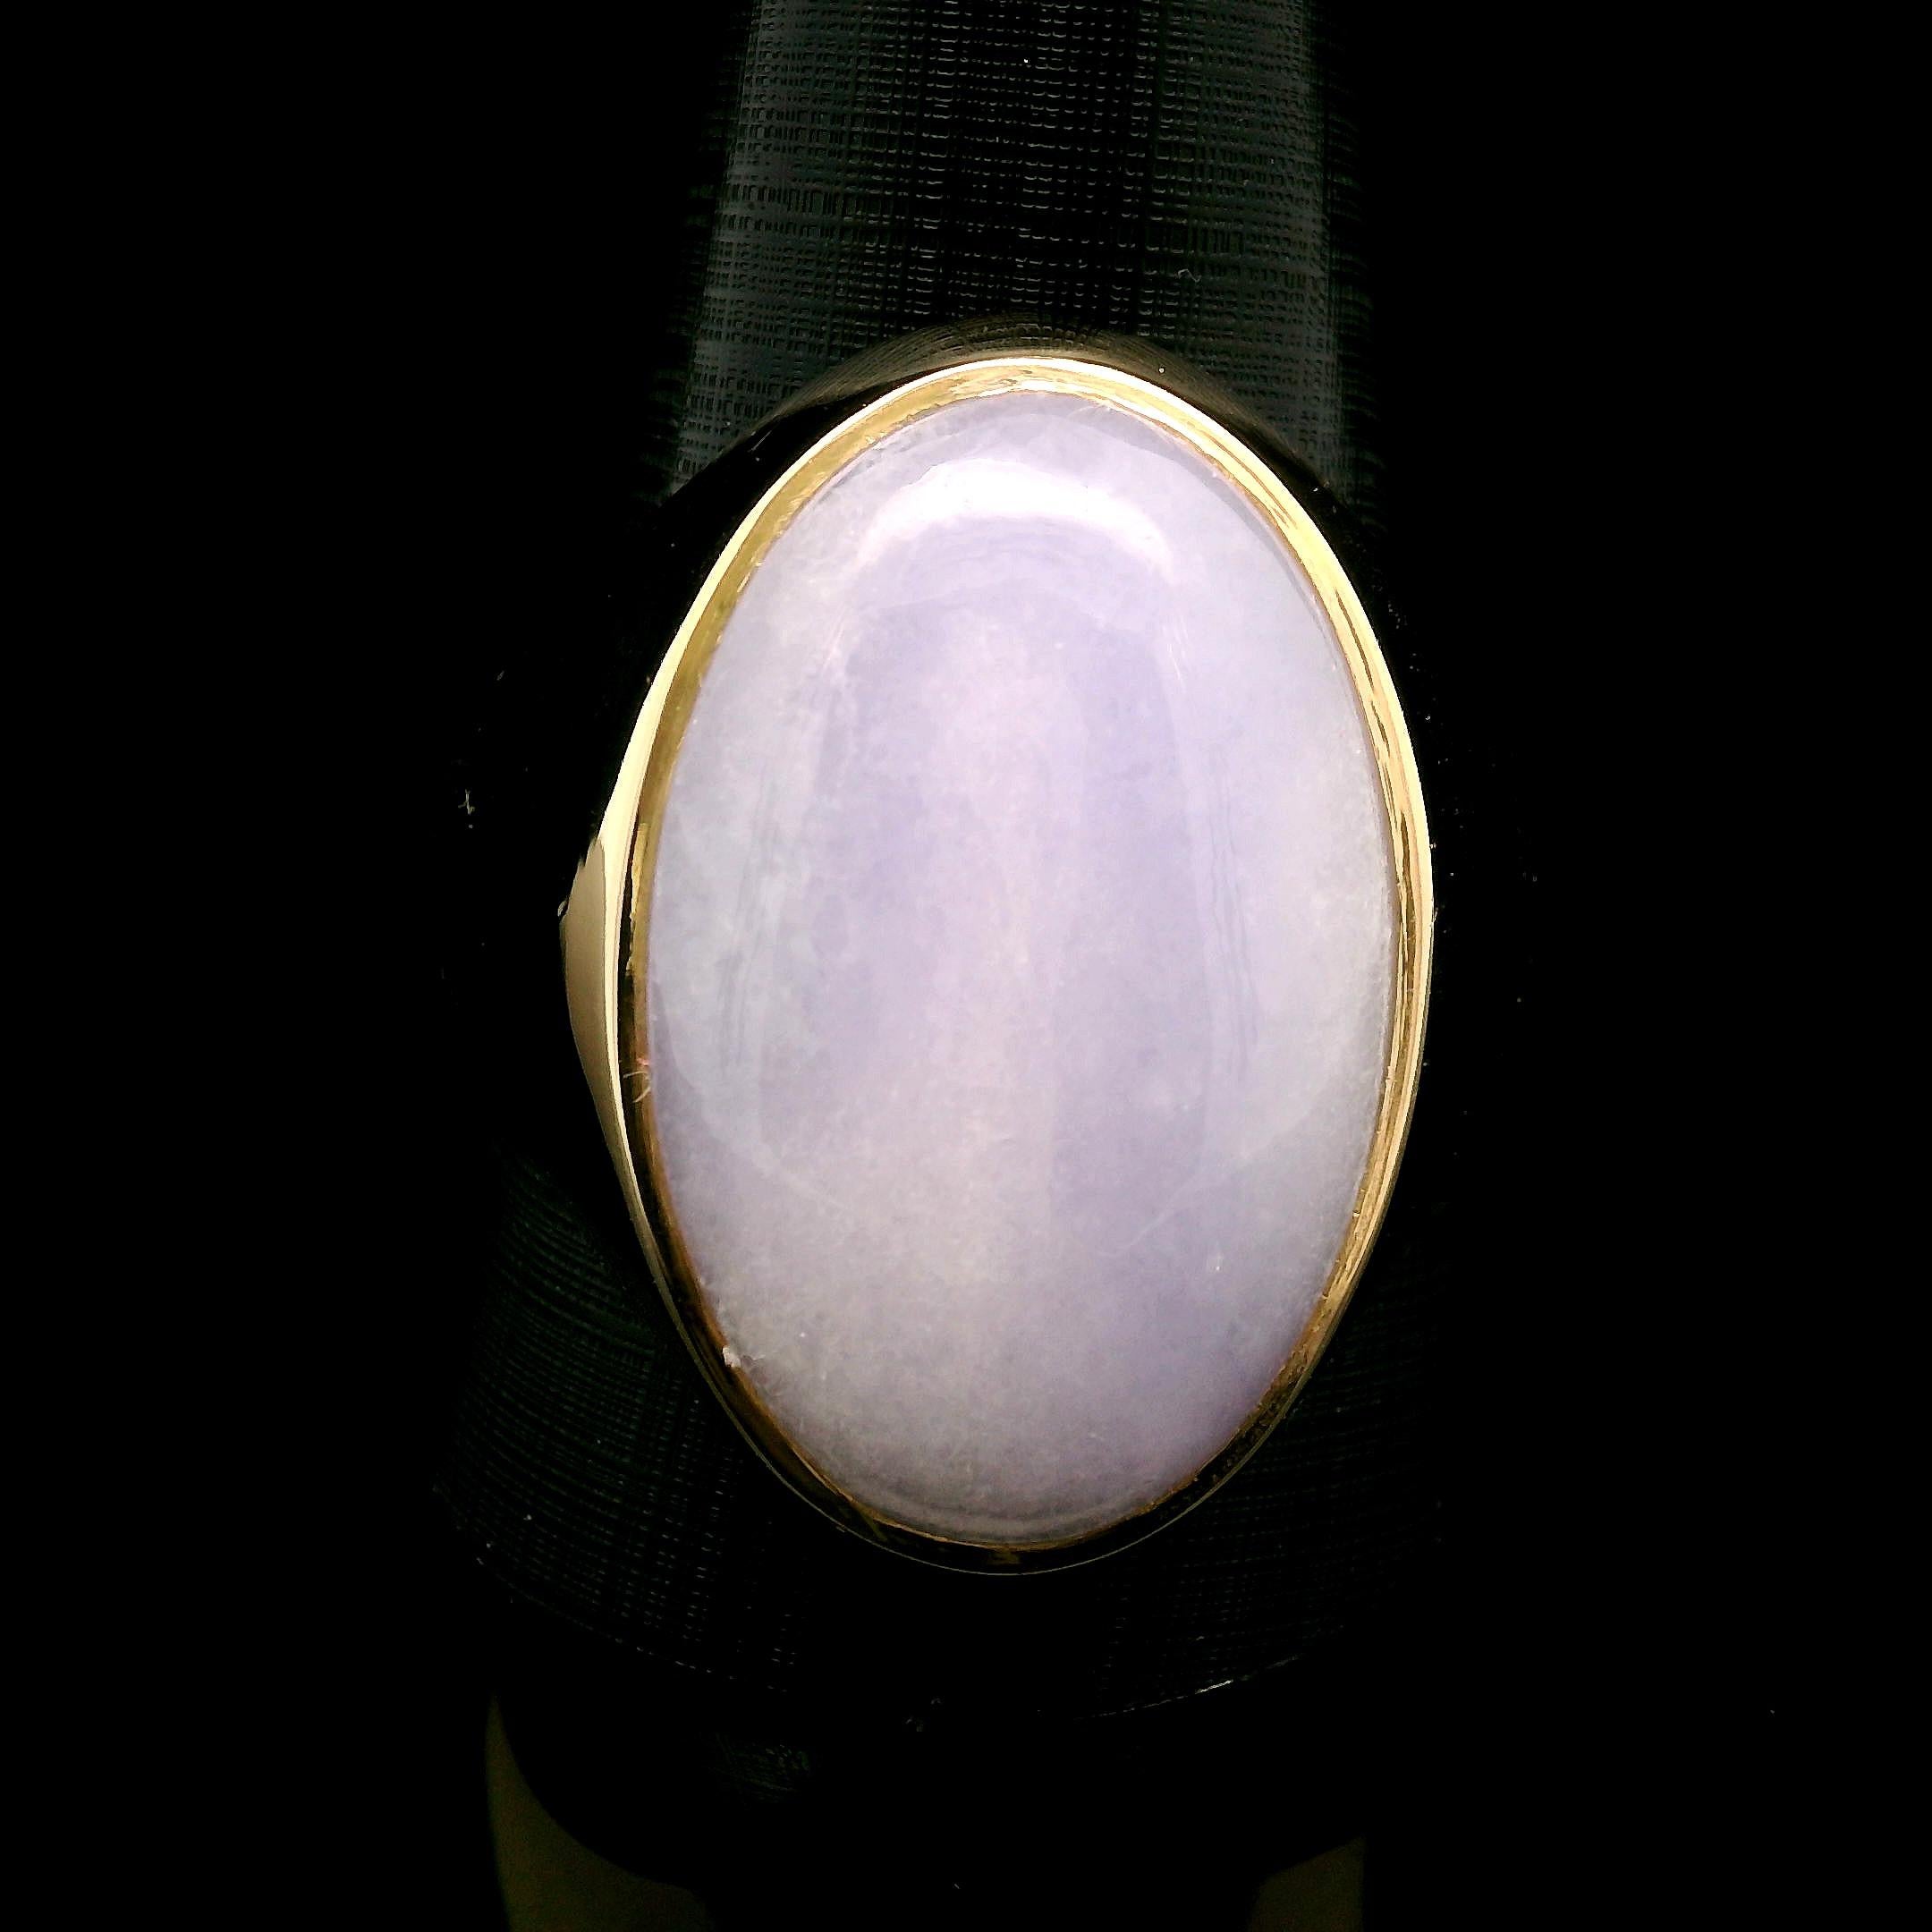 Large Men's 14k Yellow Gold Oval Bezel Cabochon Lavender Jade Ring Size 13 In Excellent Condition For Sale In Montclair, NJ